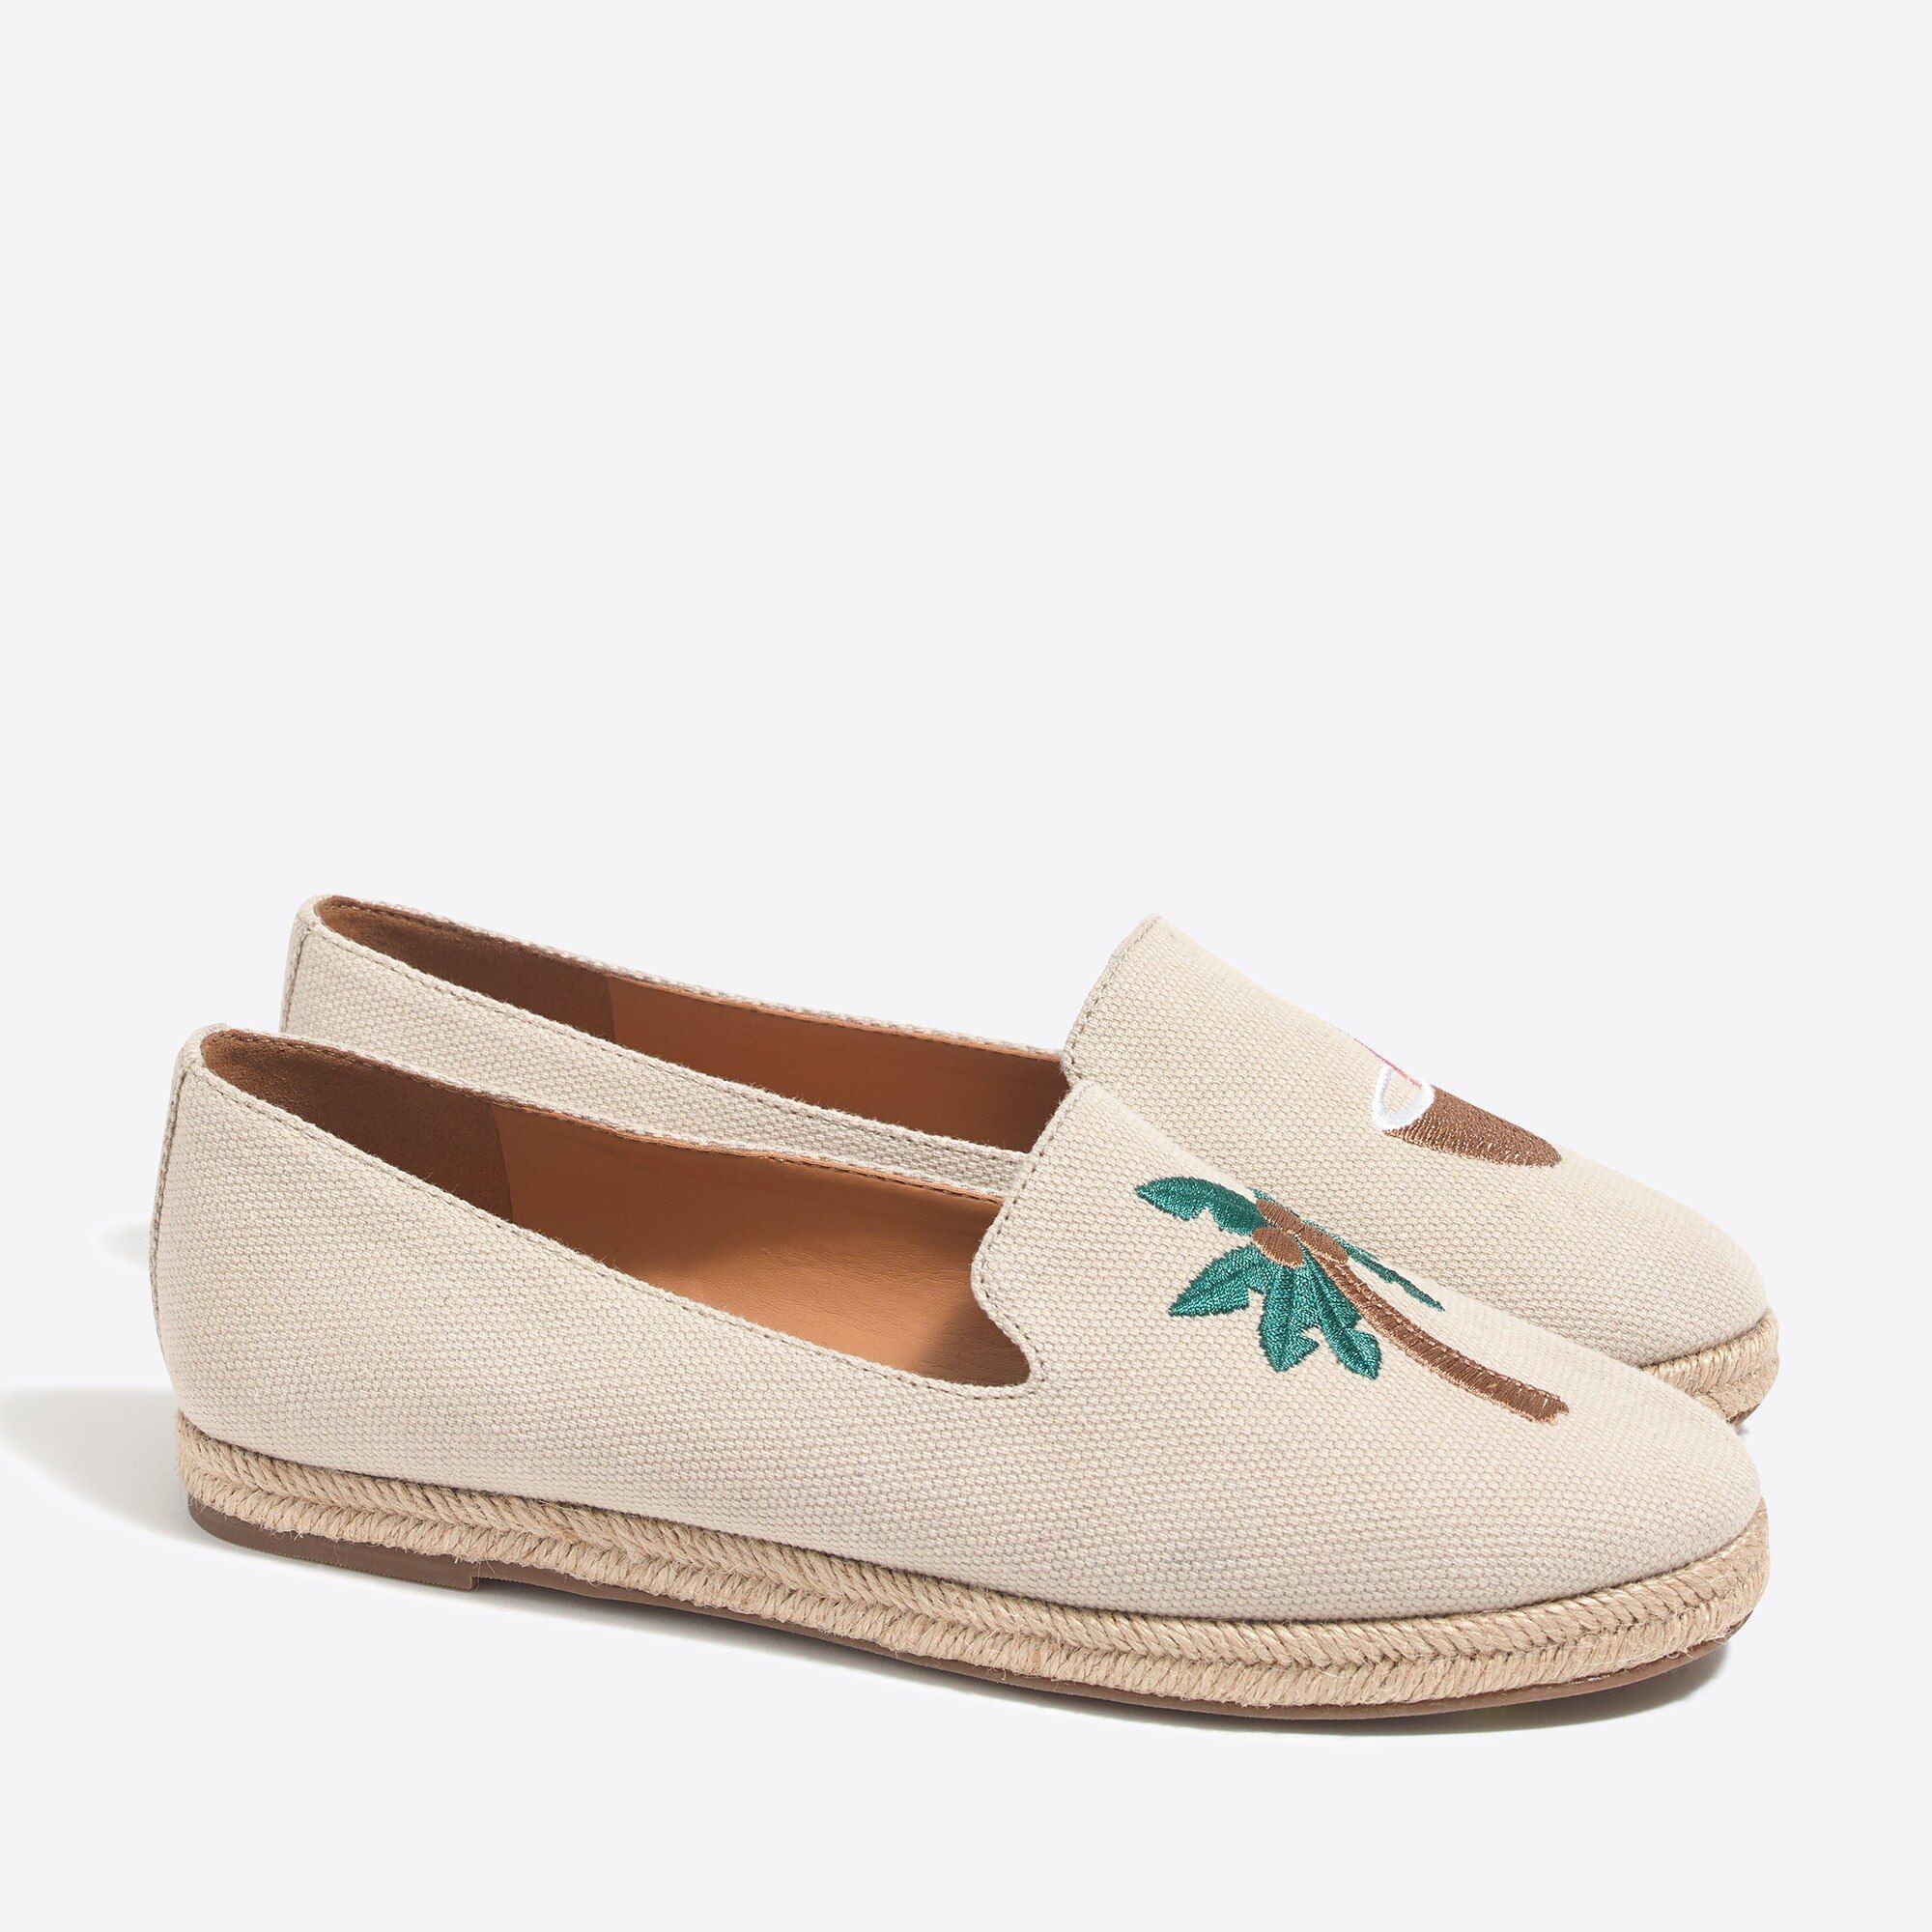 Tropical embroidered slip-on espadrilles | J.Crew Factory